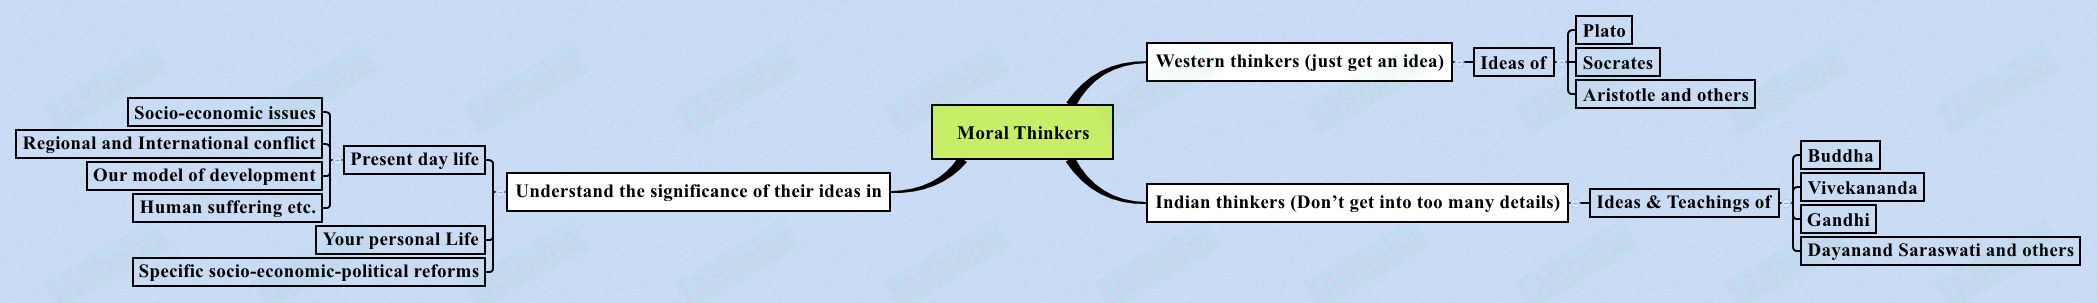 Moral Thinkers